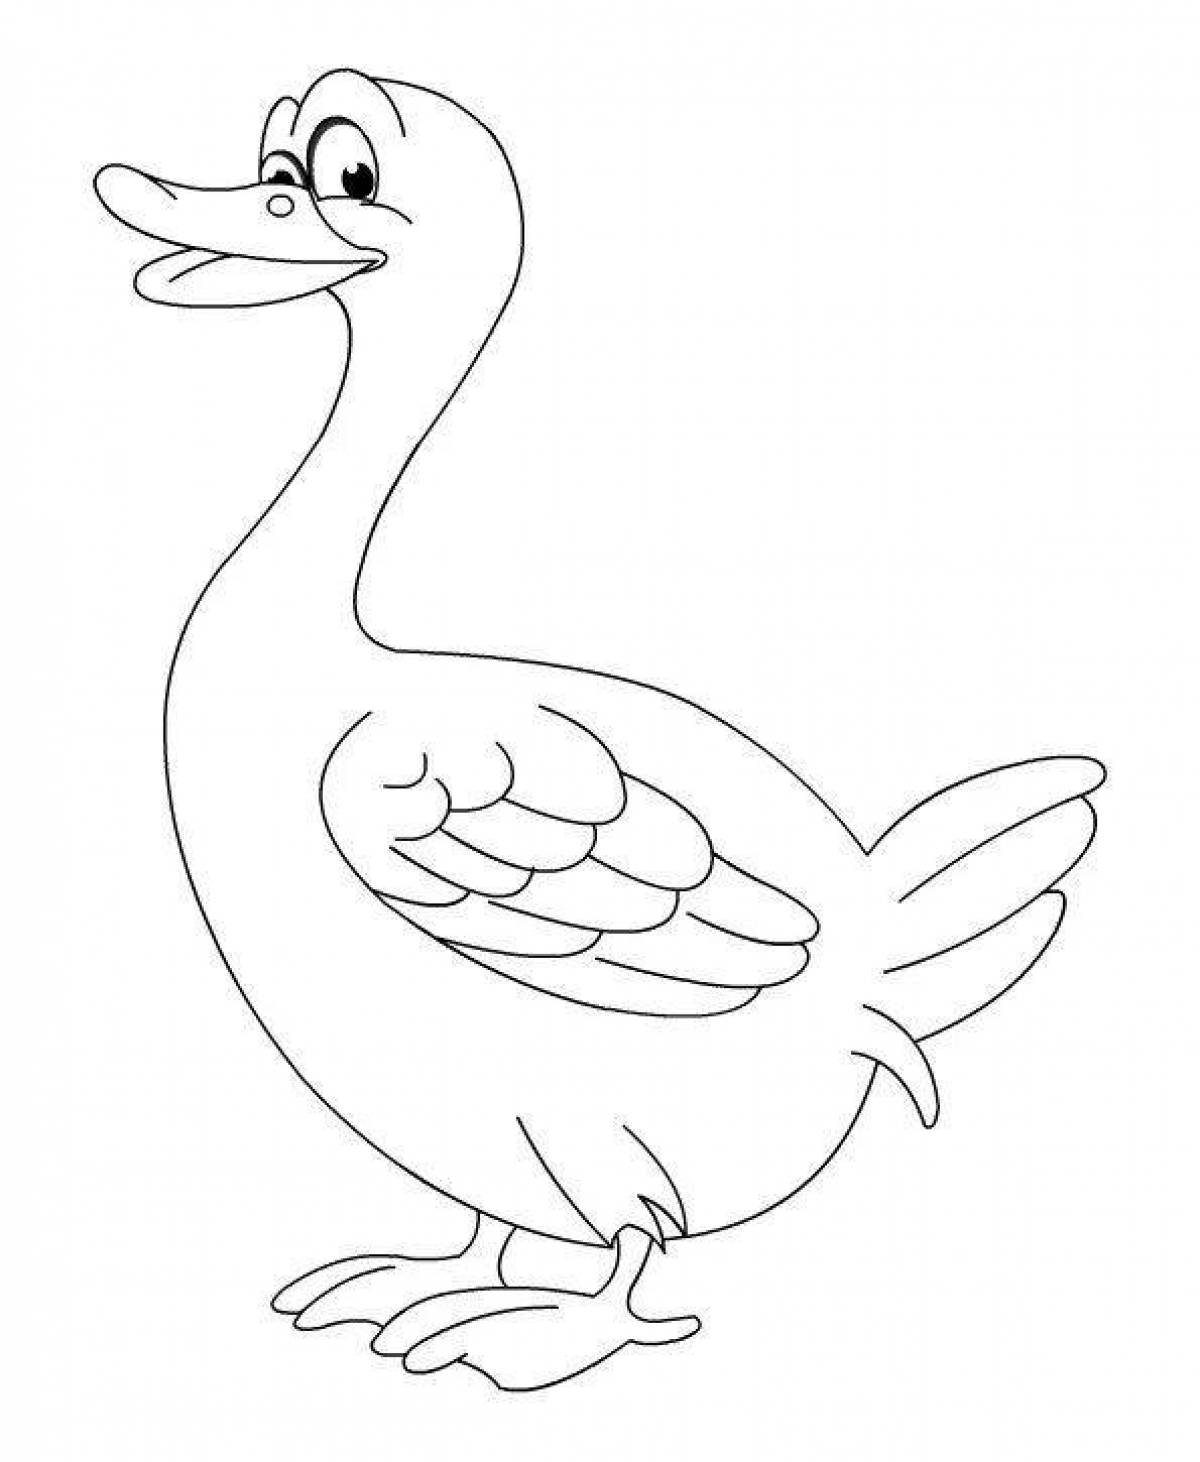 Glowing gosling coloring page